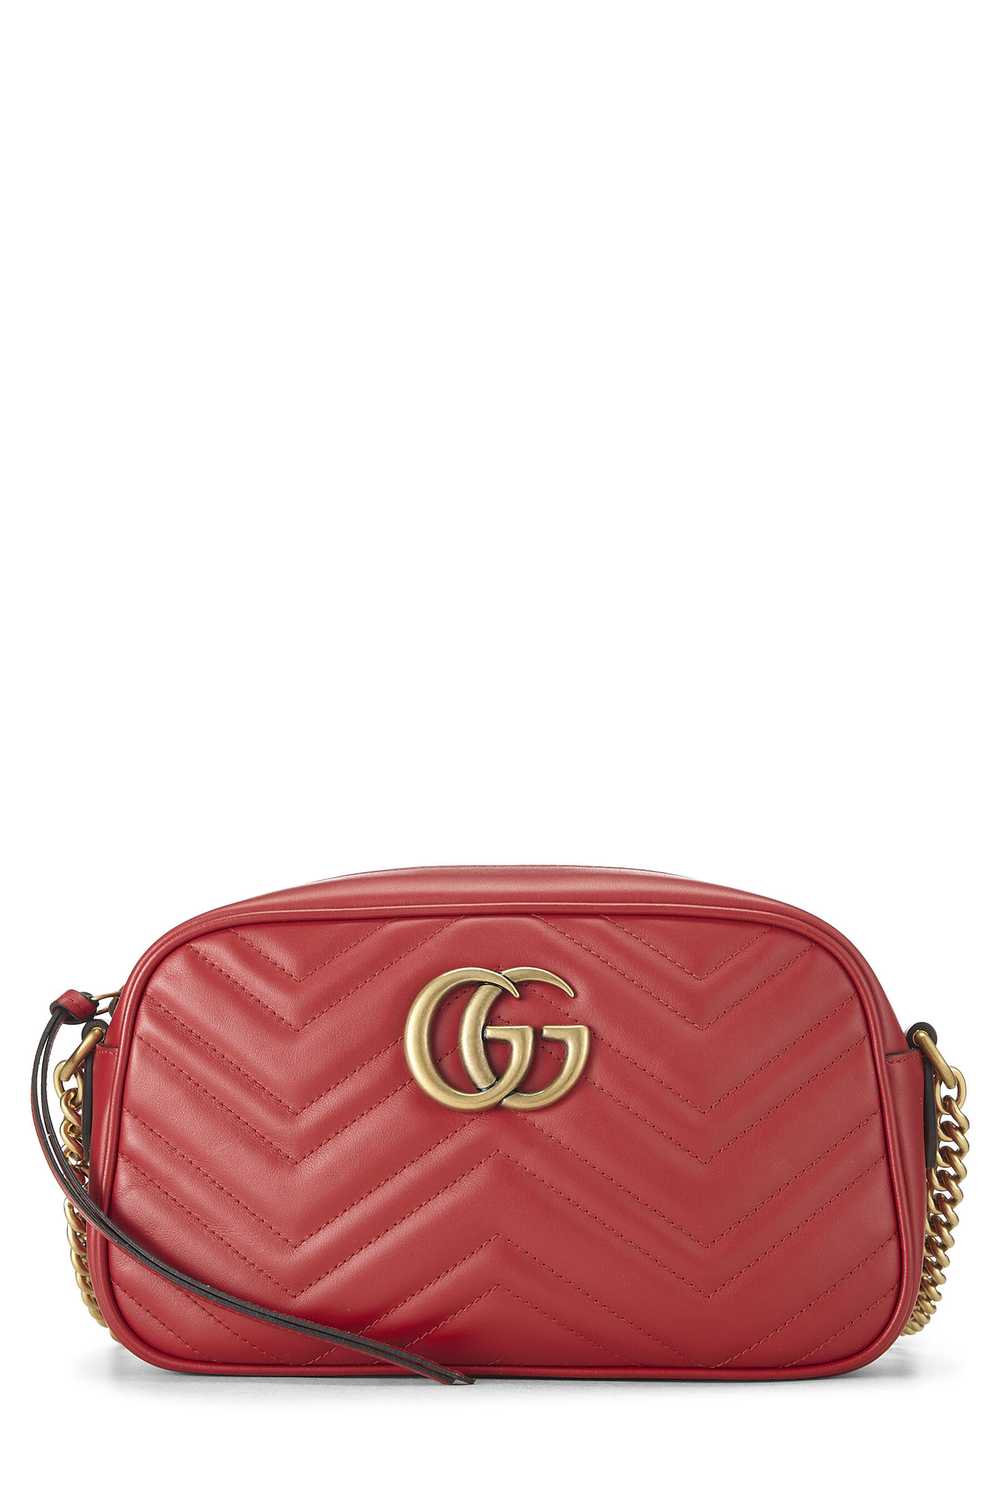 Red Leather GG Marmont Crossbody Bag Small - image 1